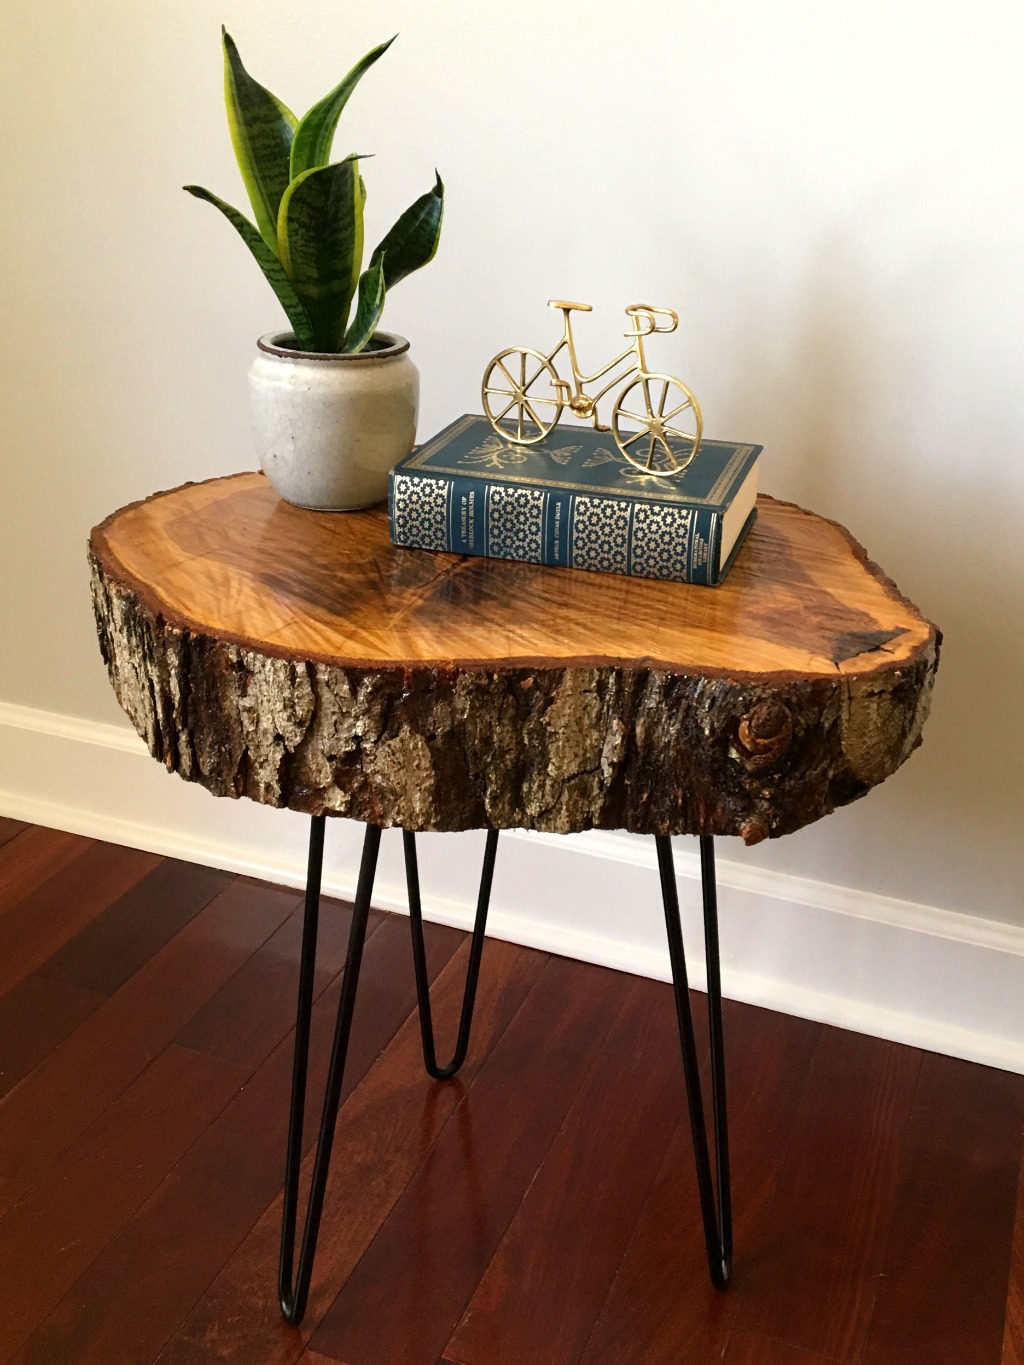 How to make a DIY tree slice table in just a few easy steps